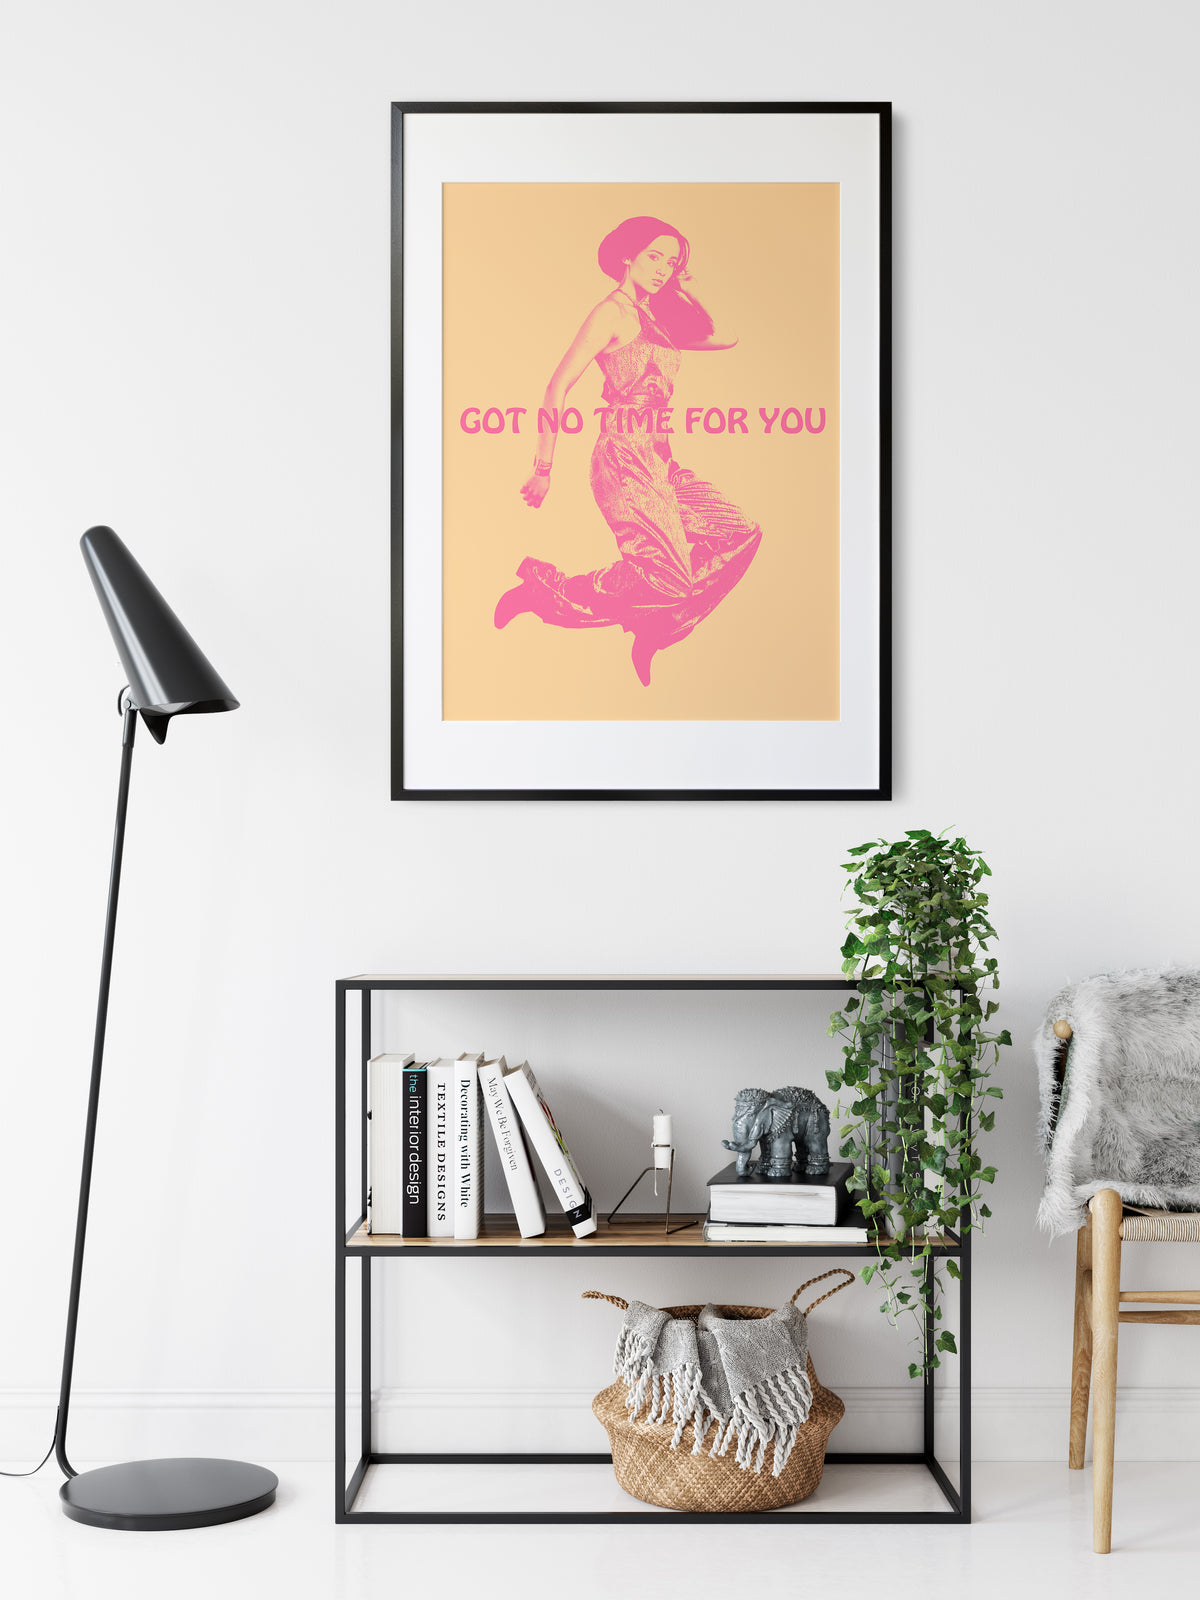 interor room view of muted yellow fine art poster print of a young woman jumping in the air with the words Got NO Time For You both the woman and words are pink